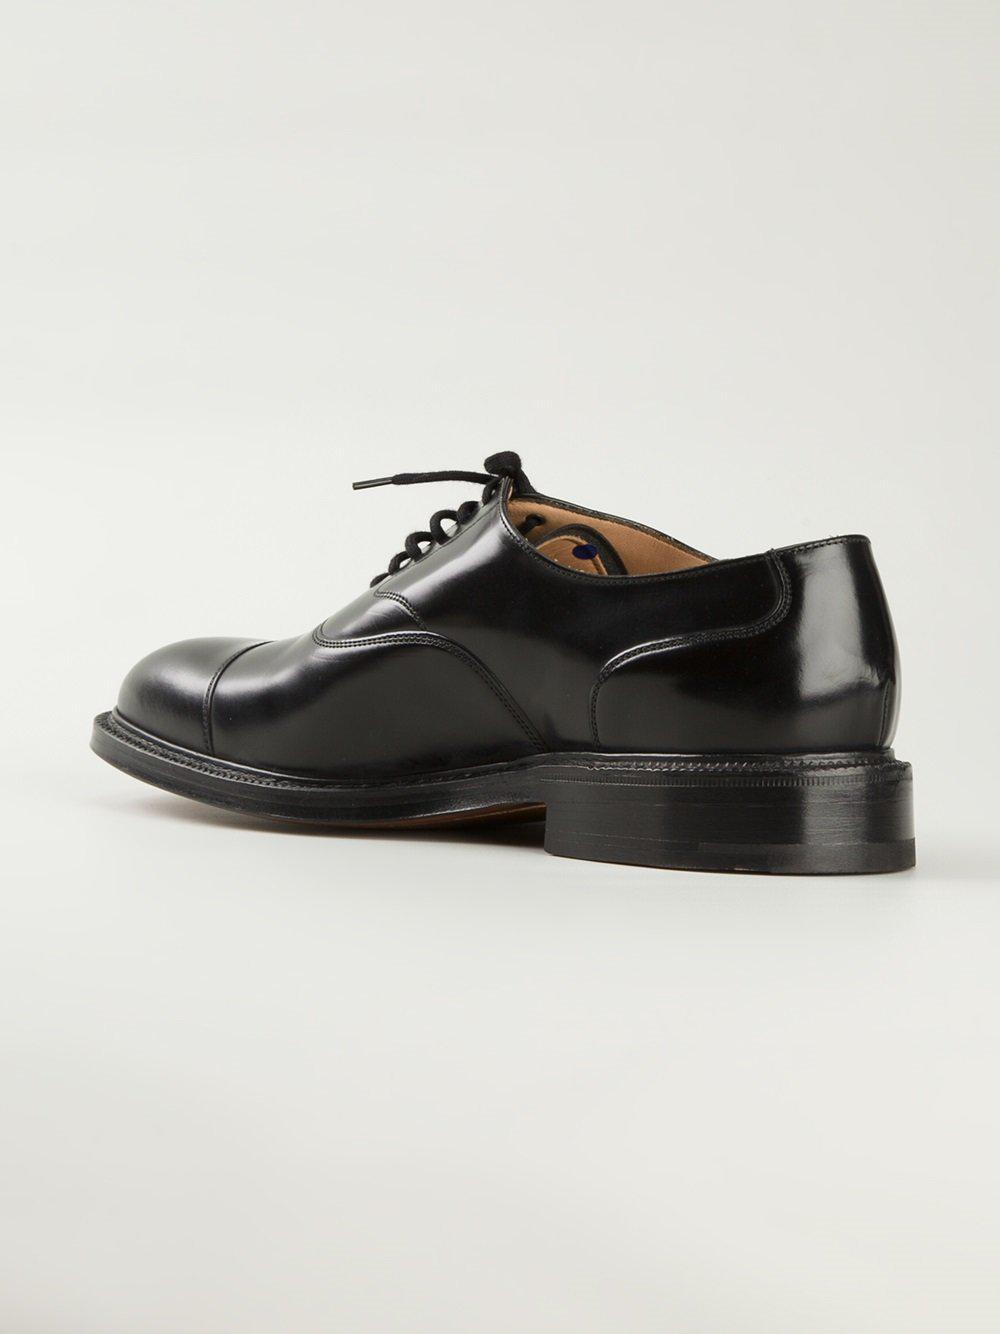 Lyst - Church'S Lancaster Oxford Shoes in Black for Men